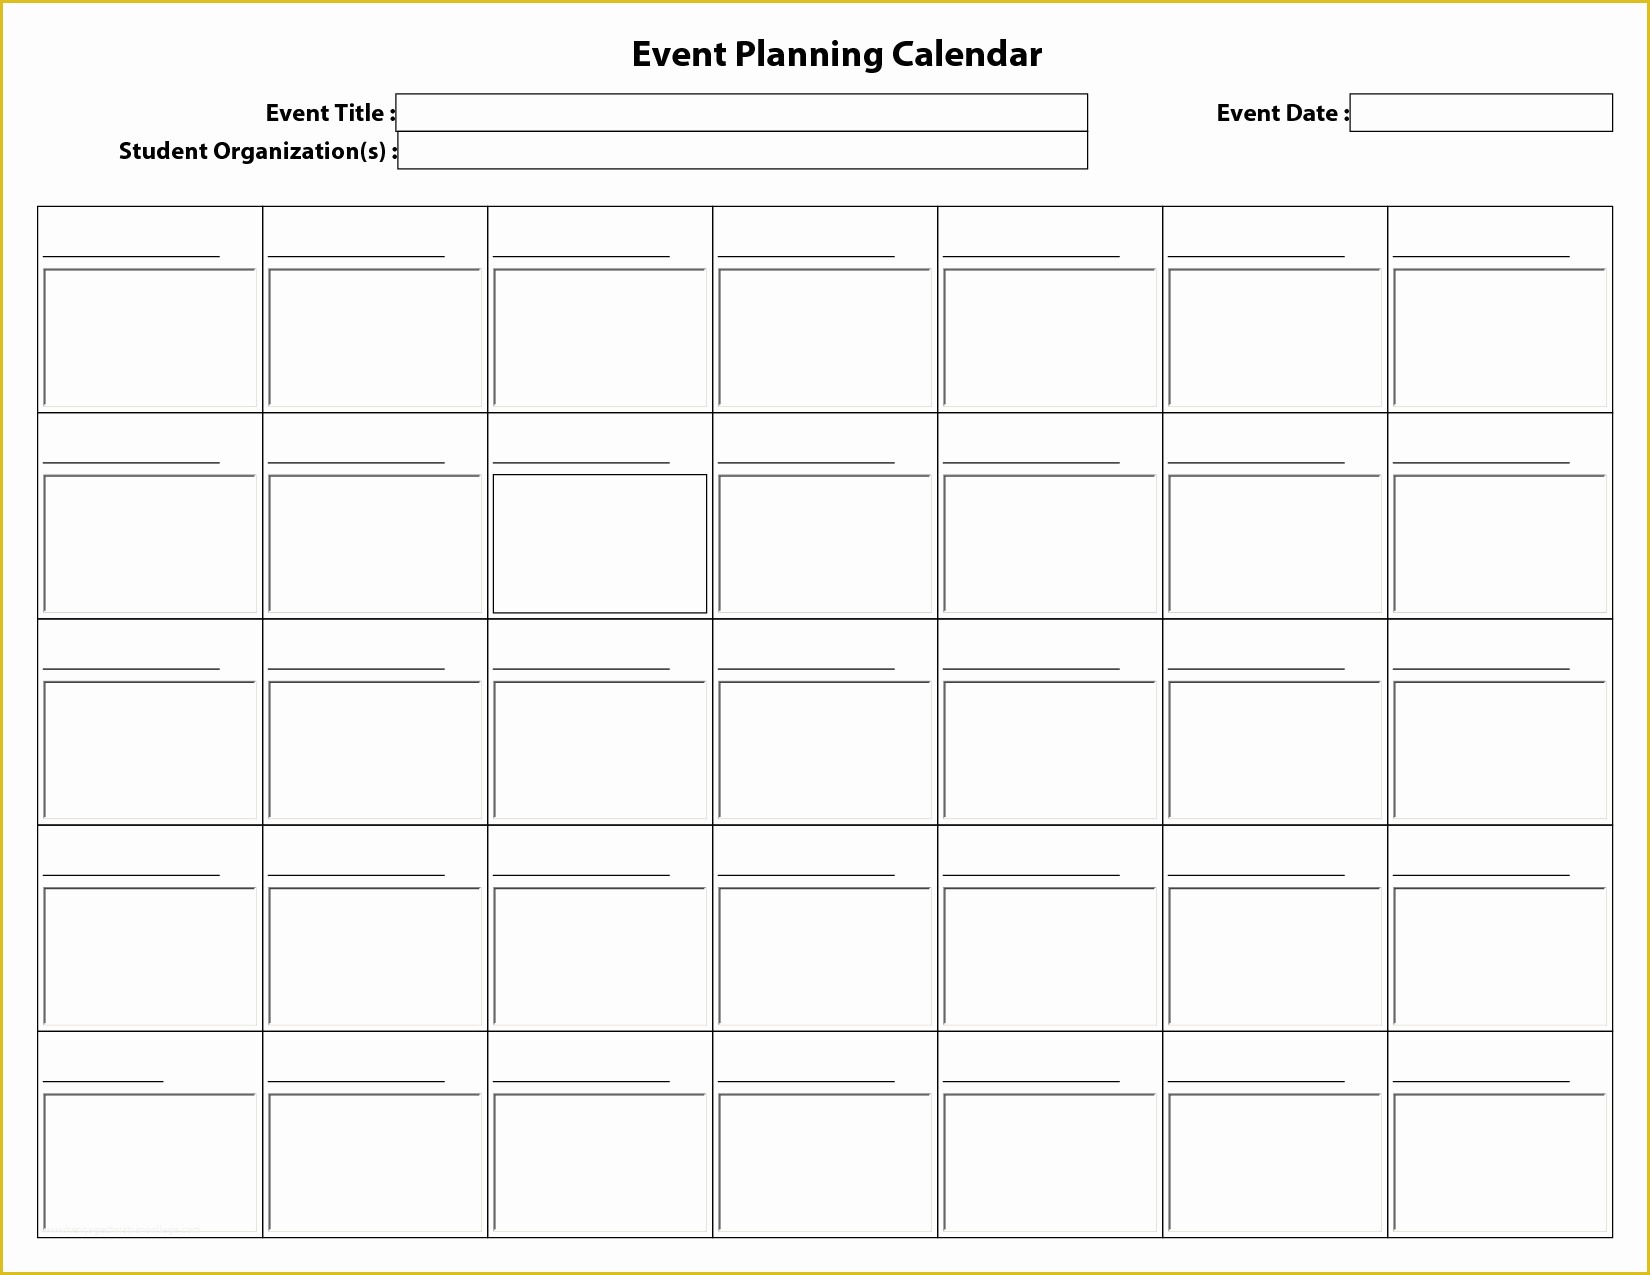 Event Planning Schedule Template Free Of Best S Of Planning Calendar Template Day Planner